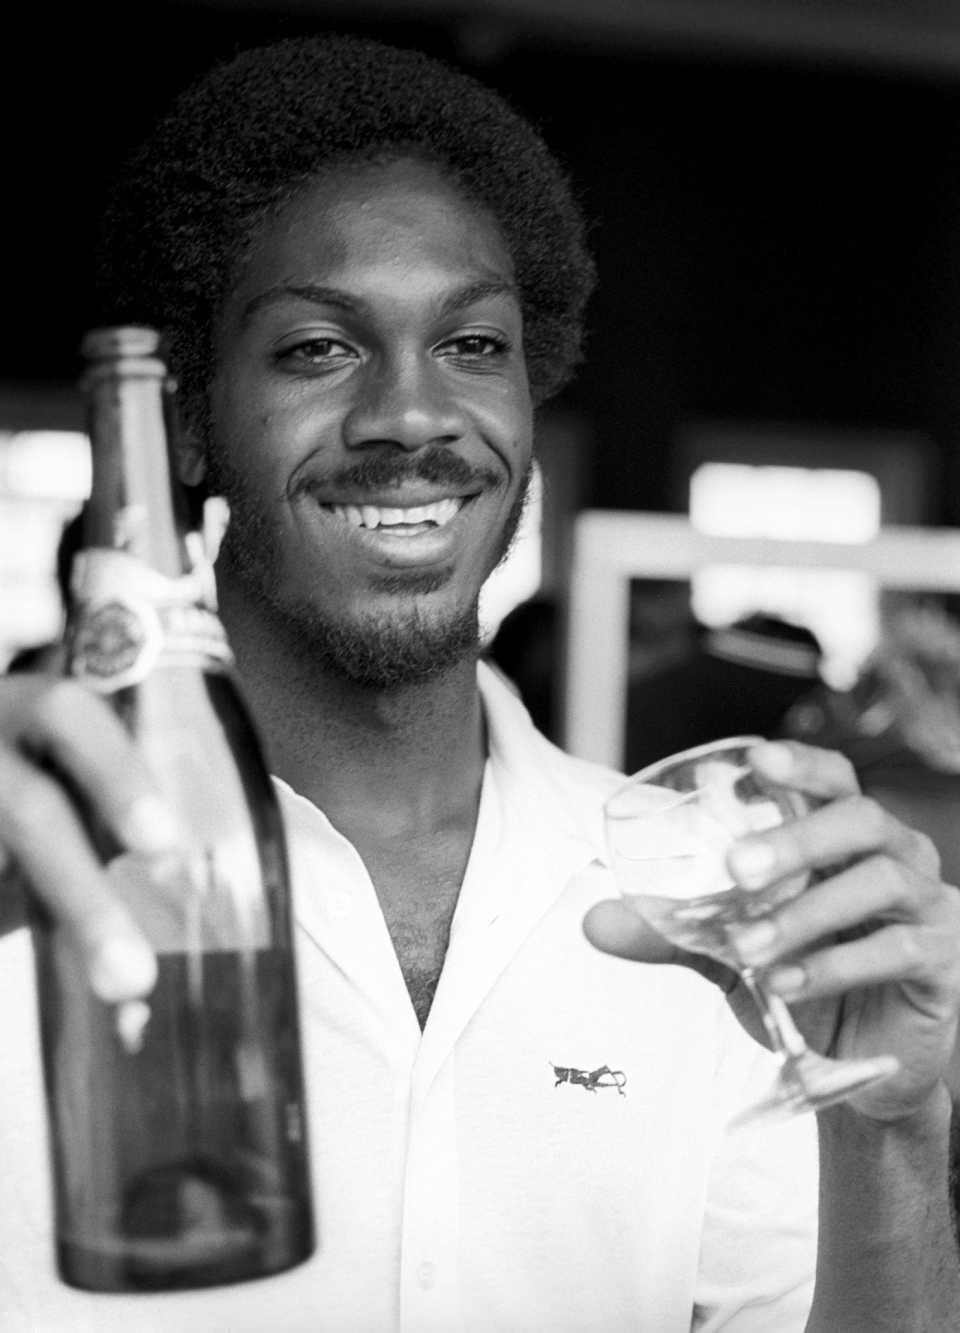 Michael Holding enjoys some champagne after his 14 wickets, England v West Indies, 5th Test, The Oval, 5th day, August 17, 1976